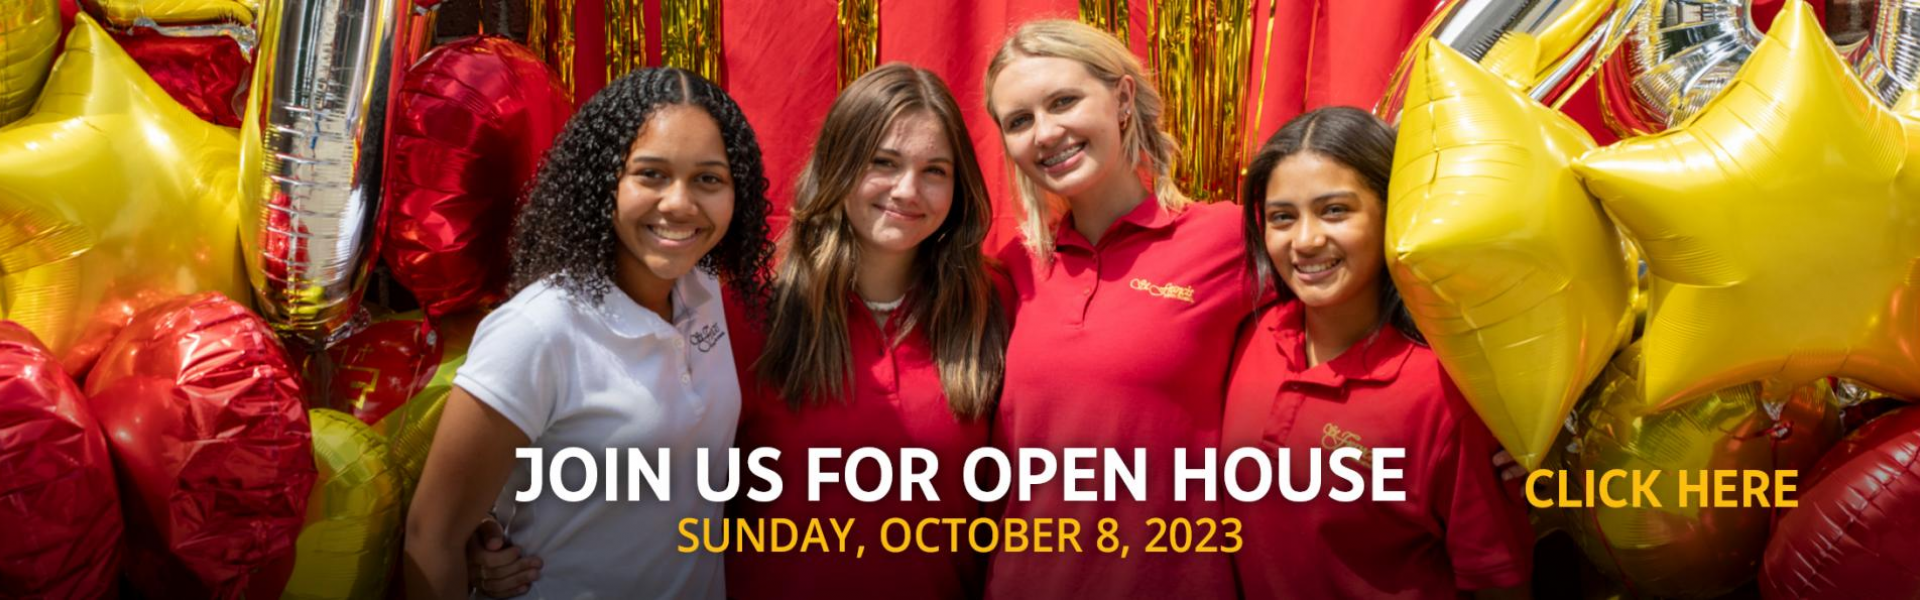 Join us for Open House: Sunday, October 8, 2023